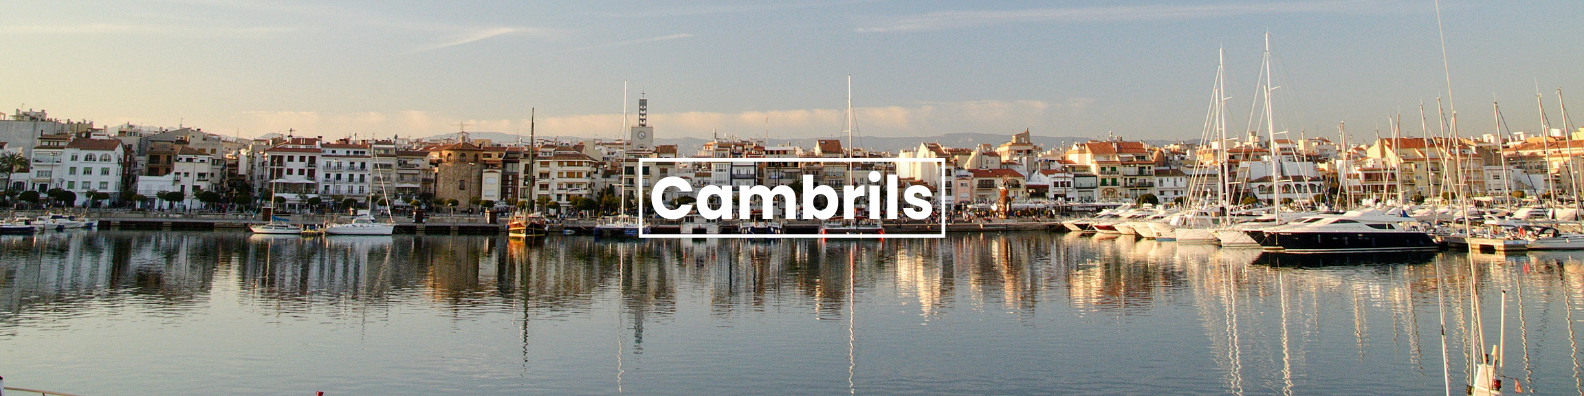 a blurry picture of a harbor with the words cambrils on the bottom Barter's Travelnet 